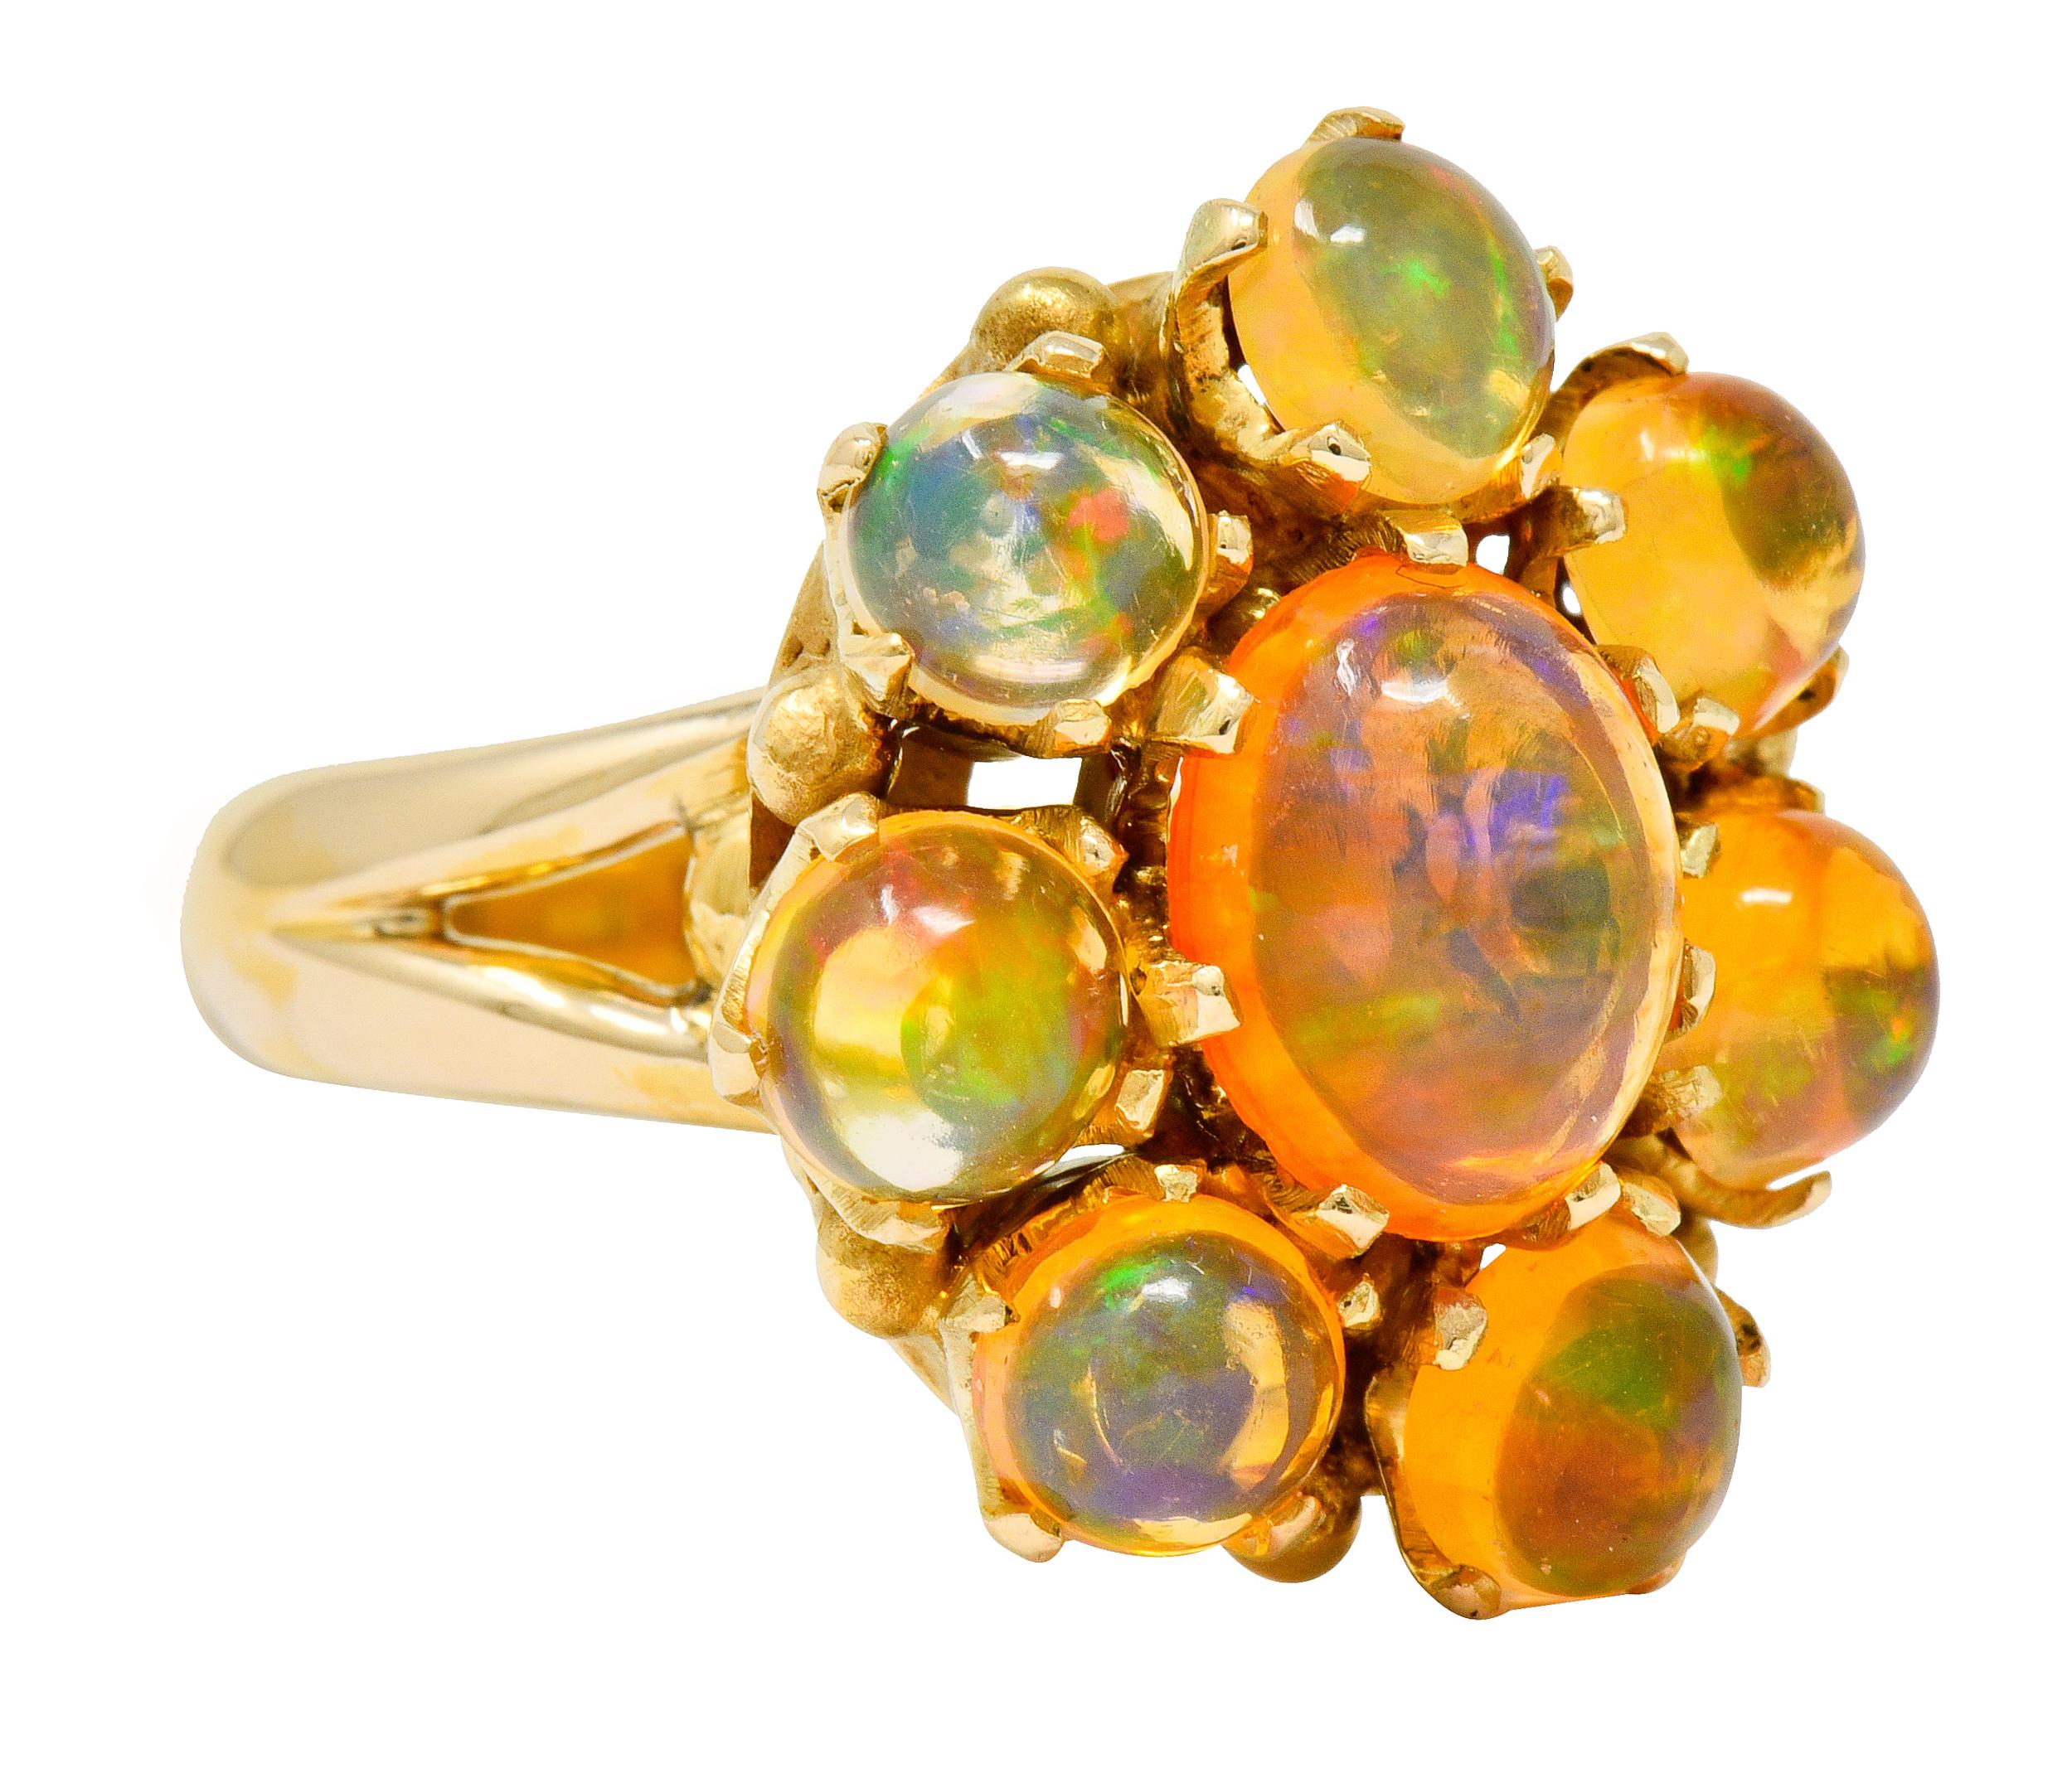 Cluster style ring centering an oval cabochon of Mexican fire opal measuring approximately 9.0 x 7.0 mm

Surrounded by 5.0 mm round Mexican fire opal cabochon

All well-matched with very light to light transparent orange body color and displaying